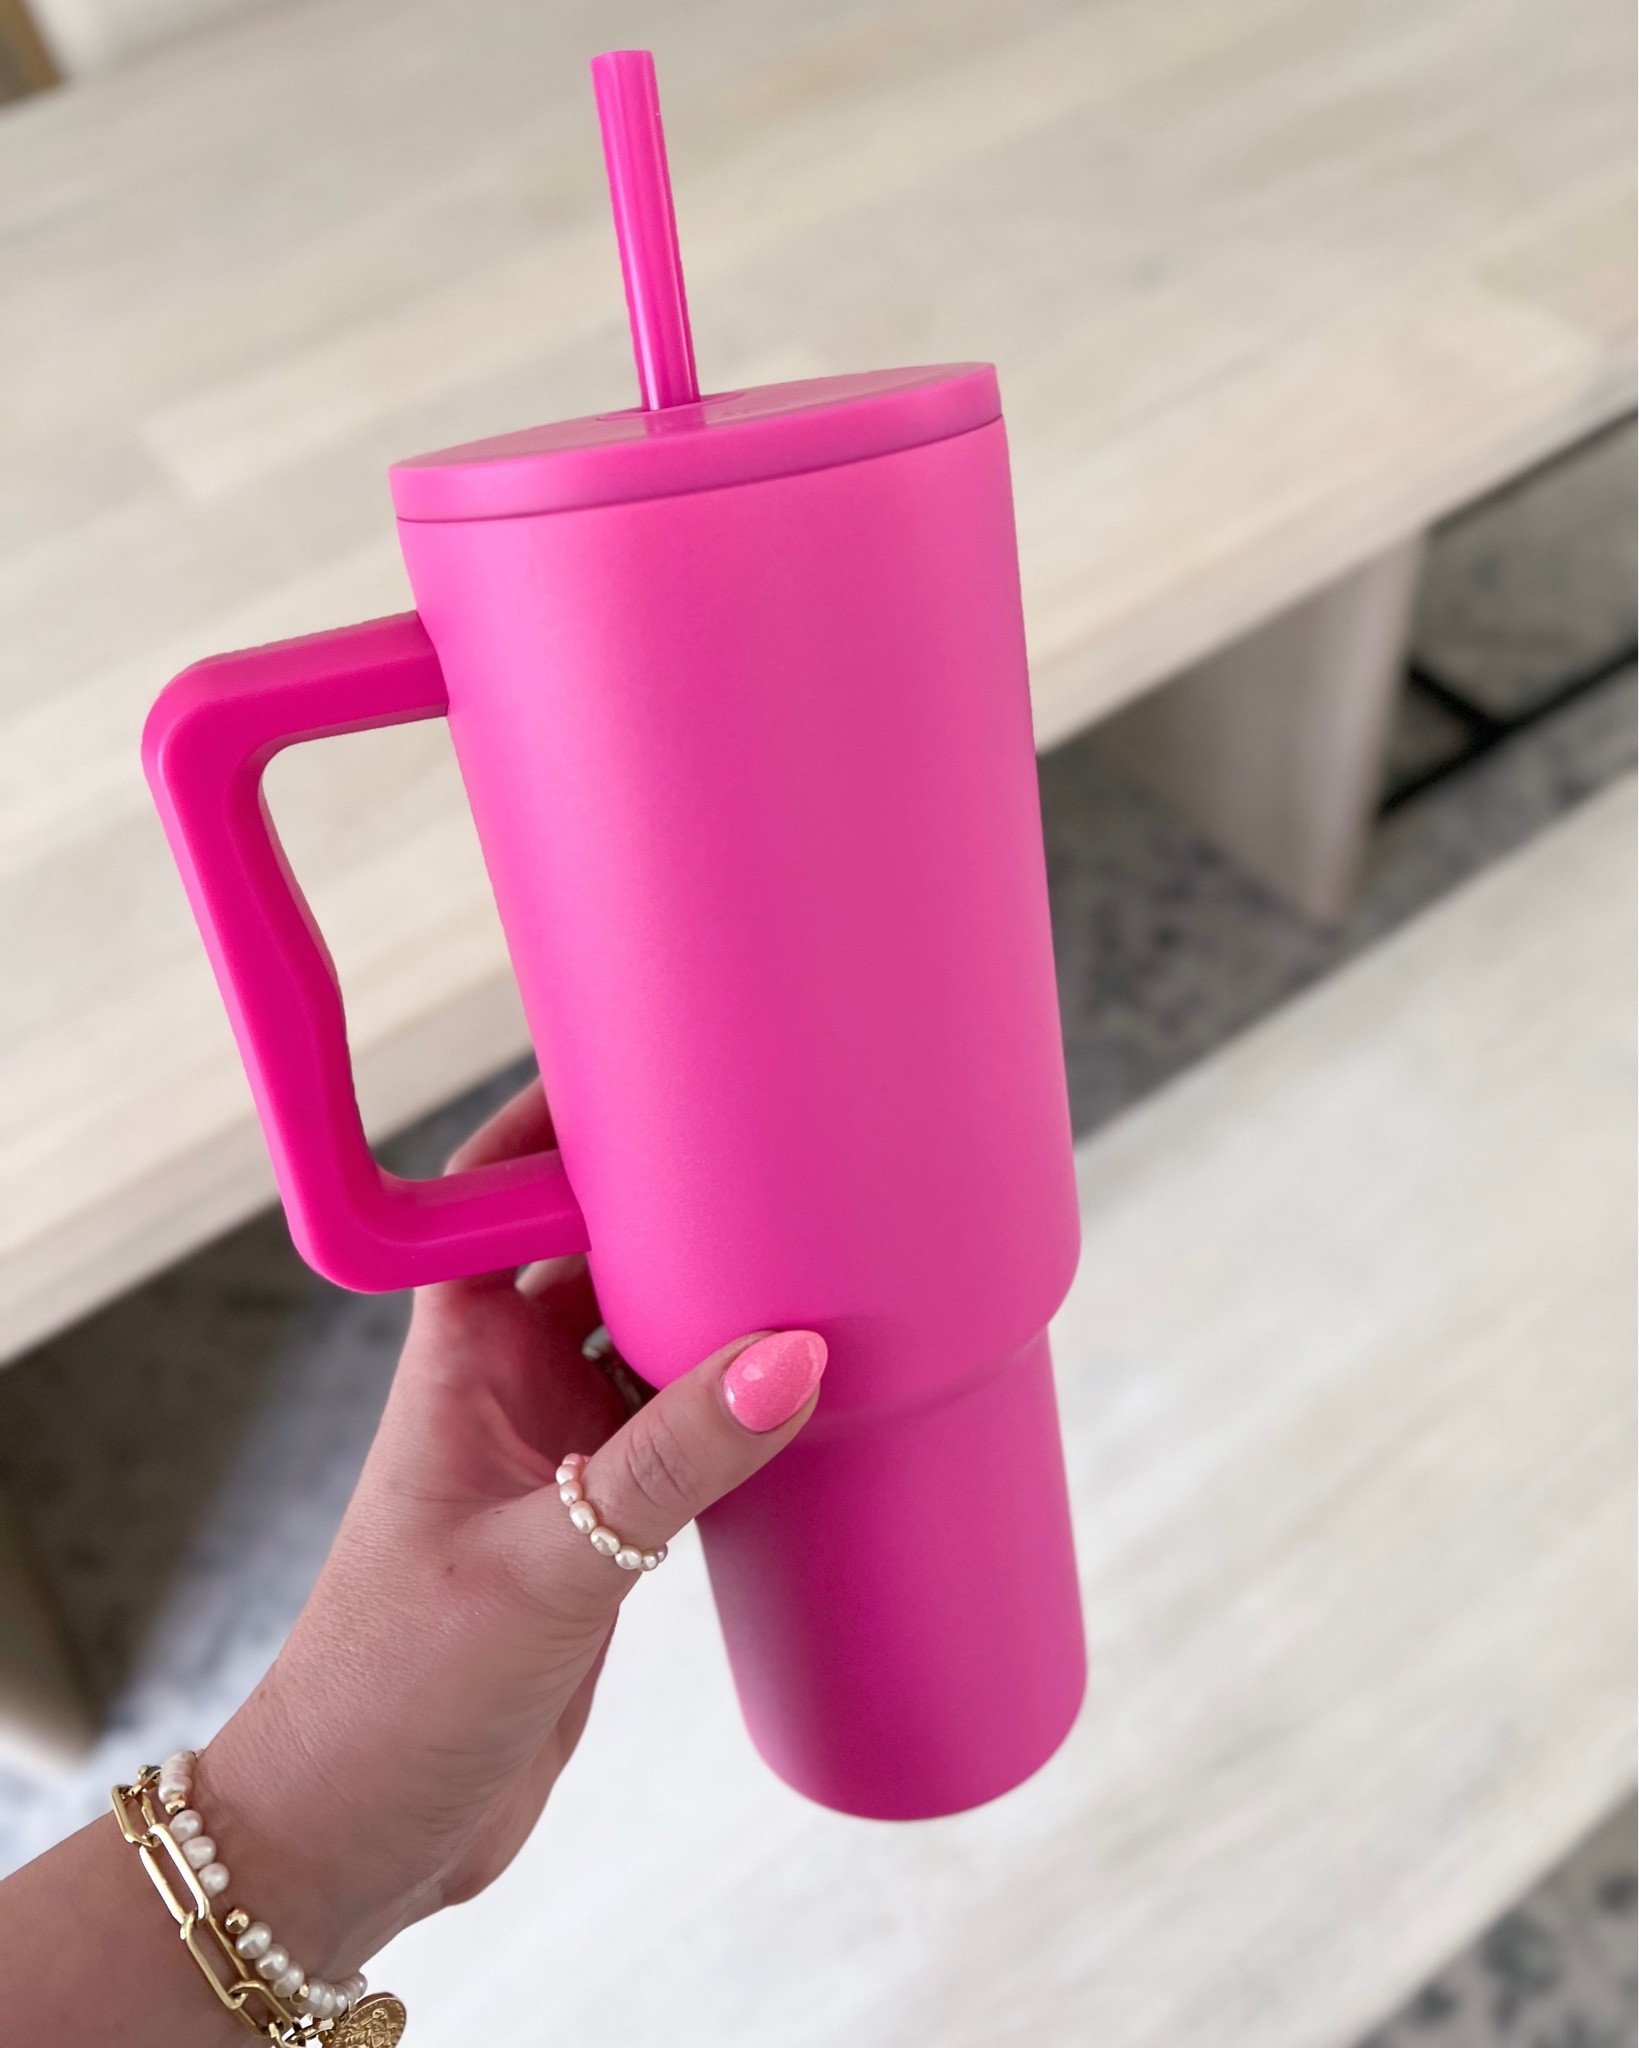 Red Hearts 40 0z Tumbler Cup with Handle and Straw Is A Fashionable Wa